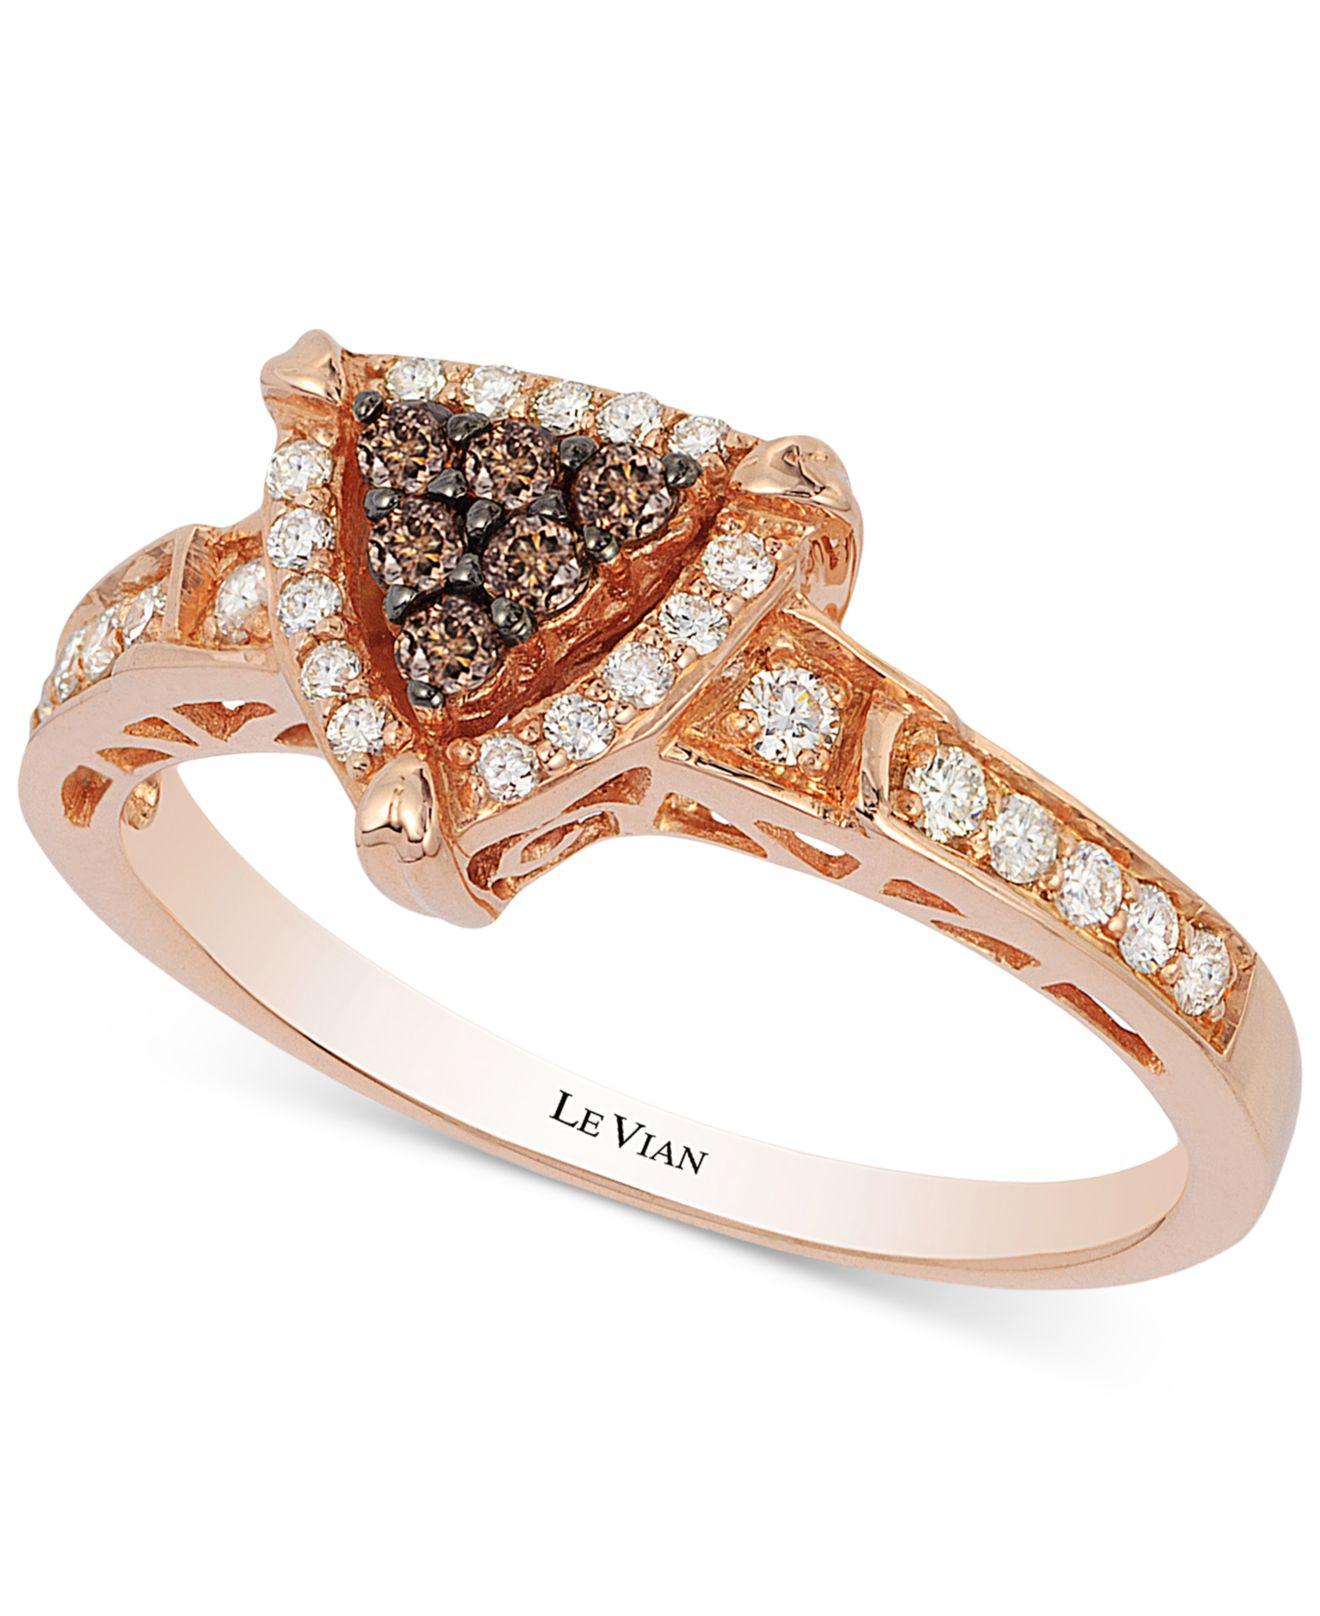 Lyst Le Vian Chocolate And Vanilla Diamond Triangle Ring (1/3 Ct. T.w.) In 14k Rose Gold in